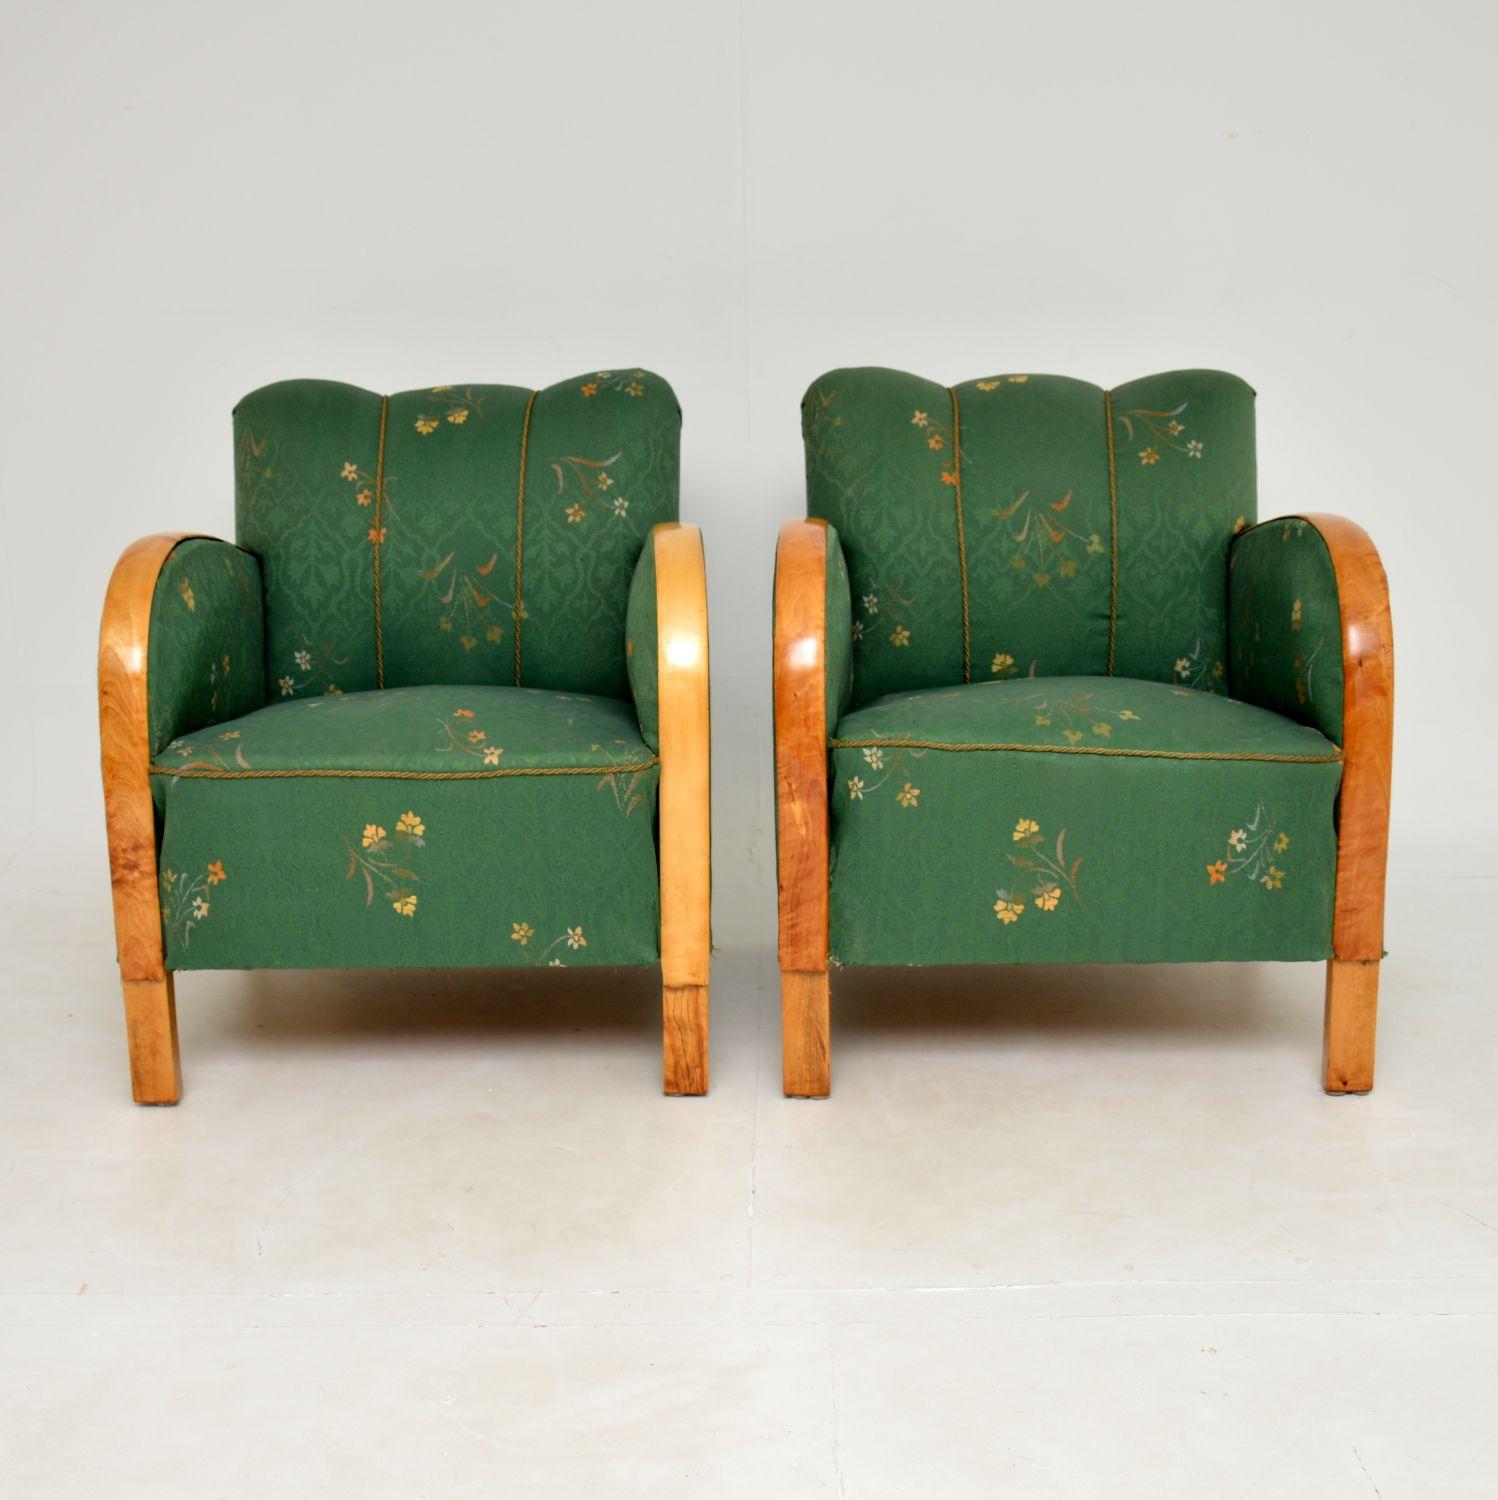 A stunning pair of original Swedish Art Deco period armchairs, dating from around the 1930’s period.
The quality is amazing and these have a gorgeous design.
We normally have these re-upholstered in our cream cotton fabric, and then they are often